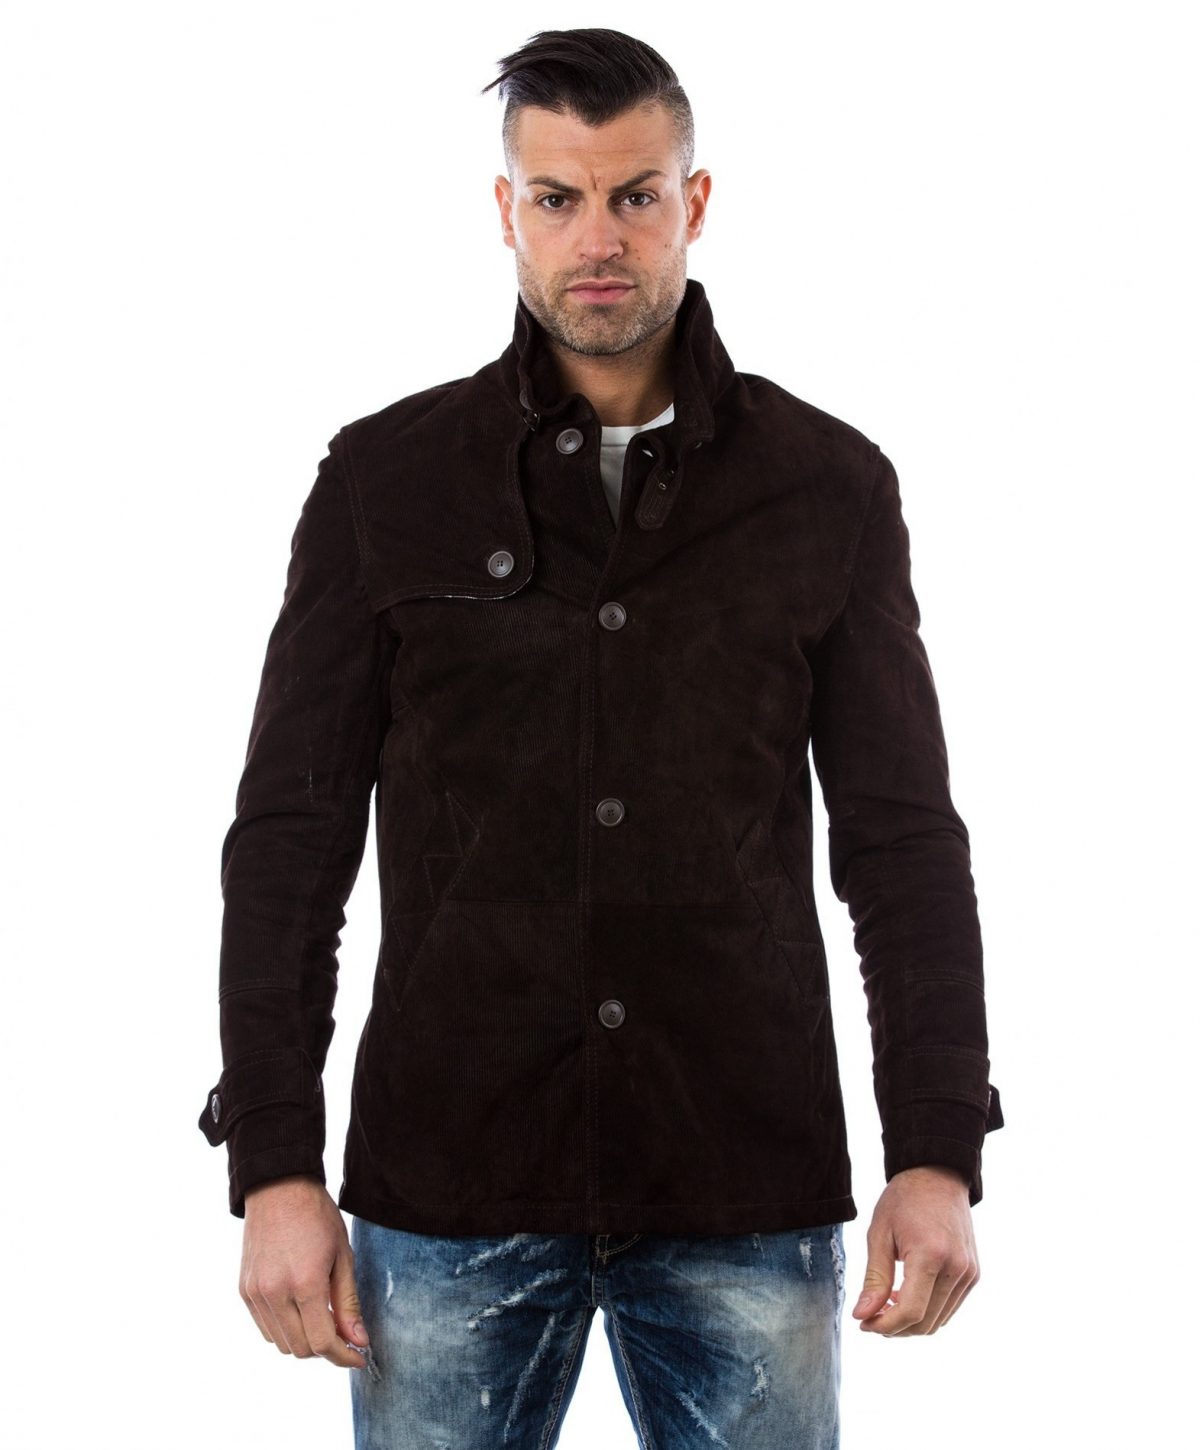 man-suede-leather-jacket-3-buttons-brown-color-gm